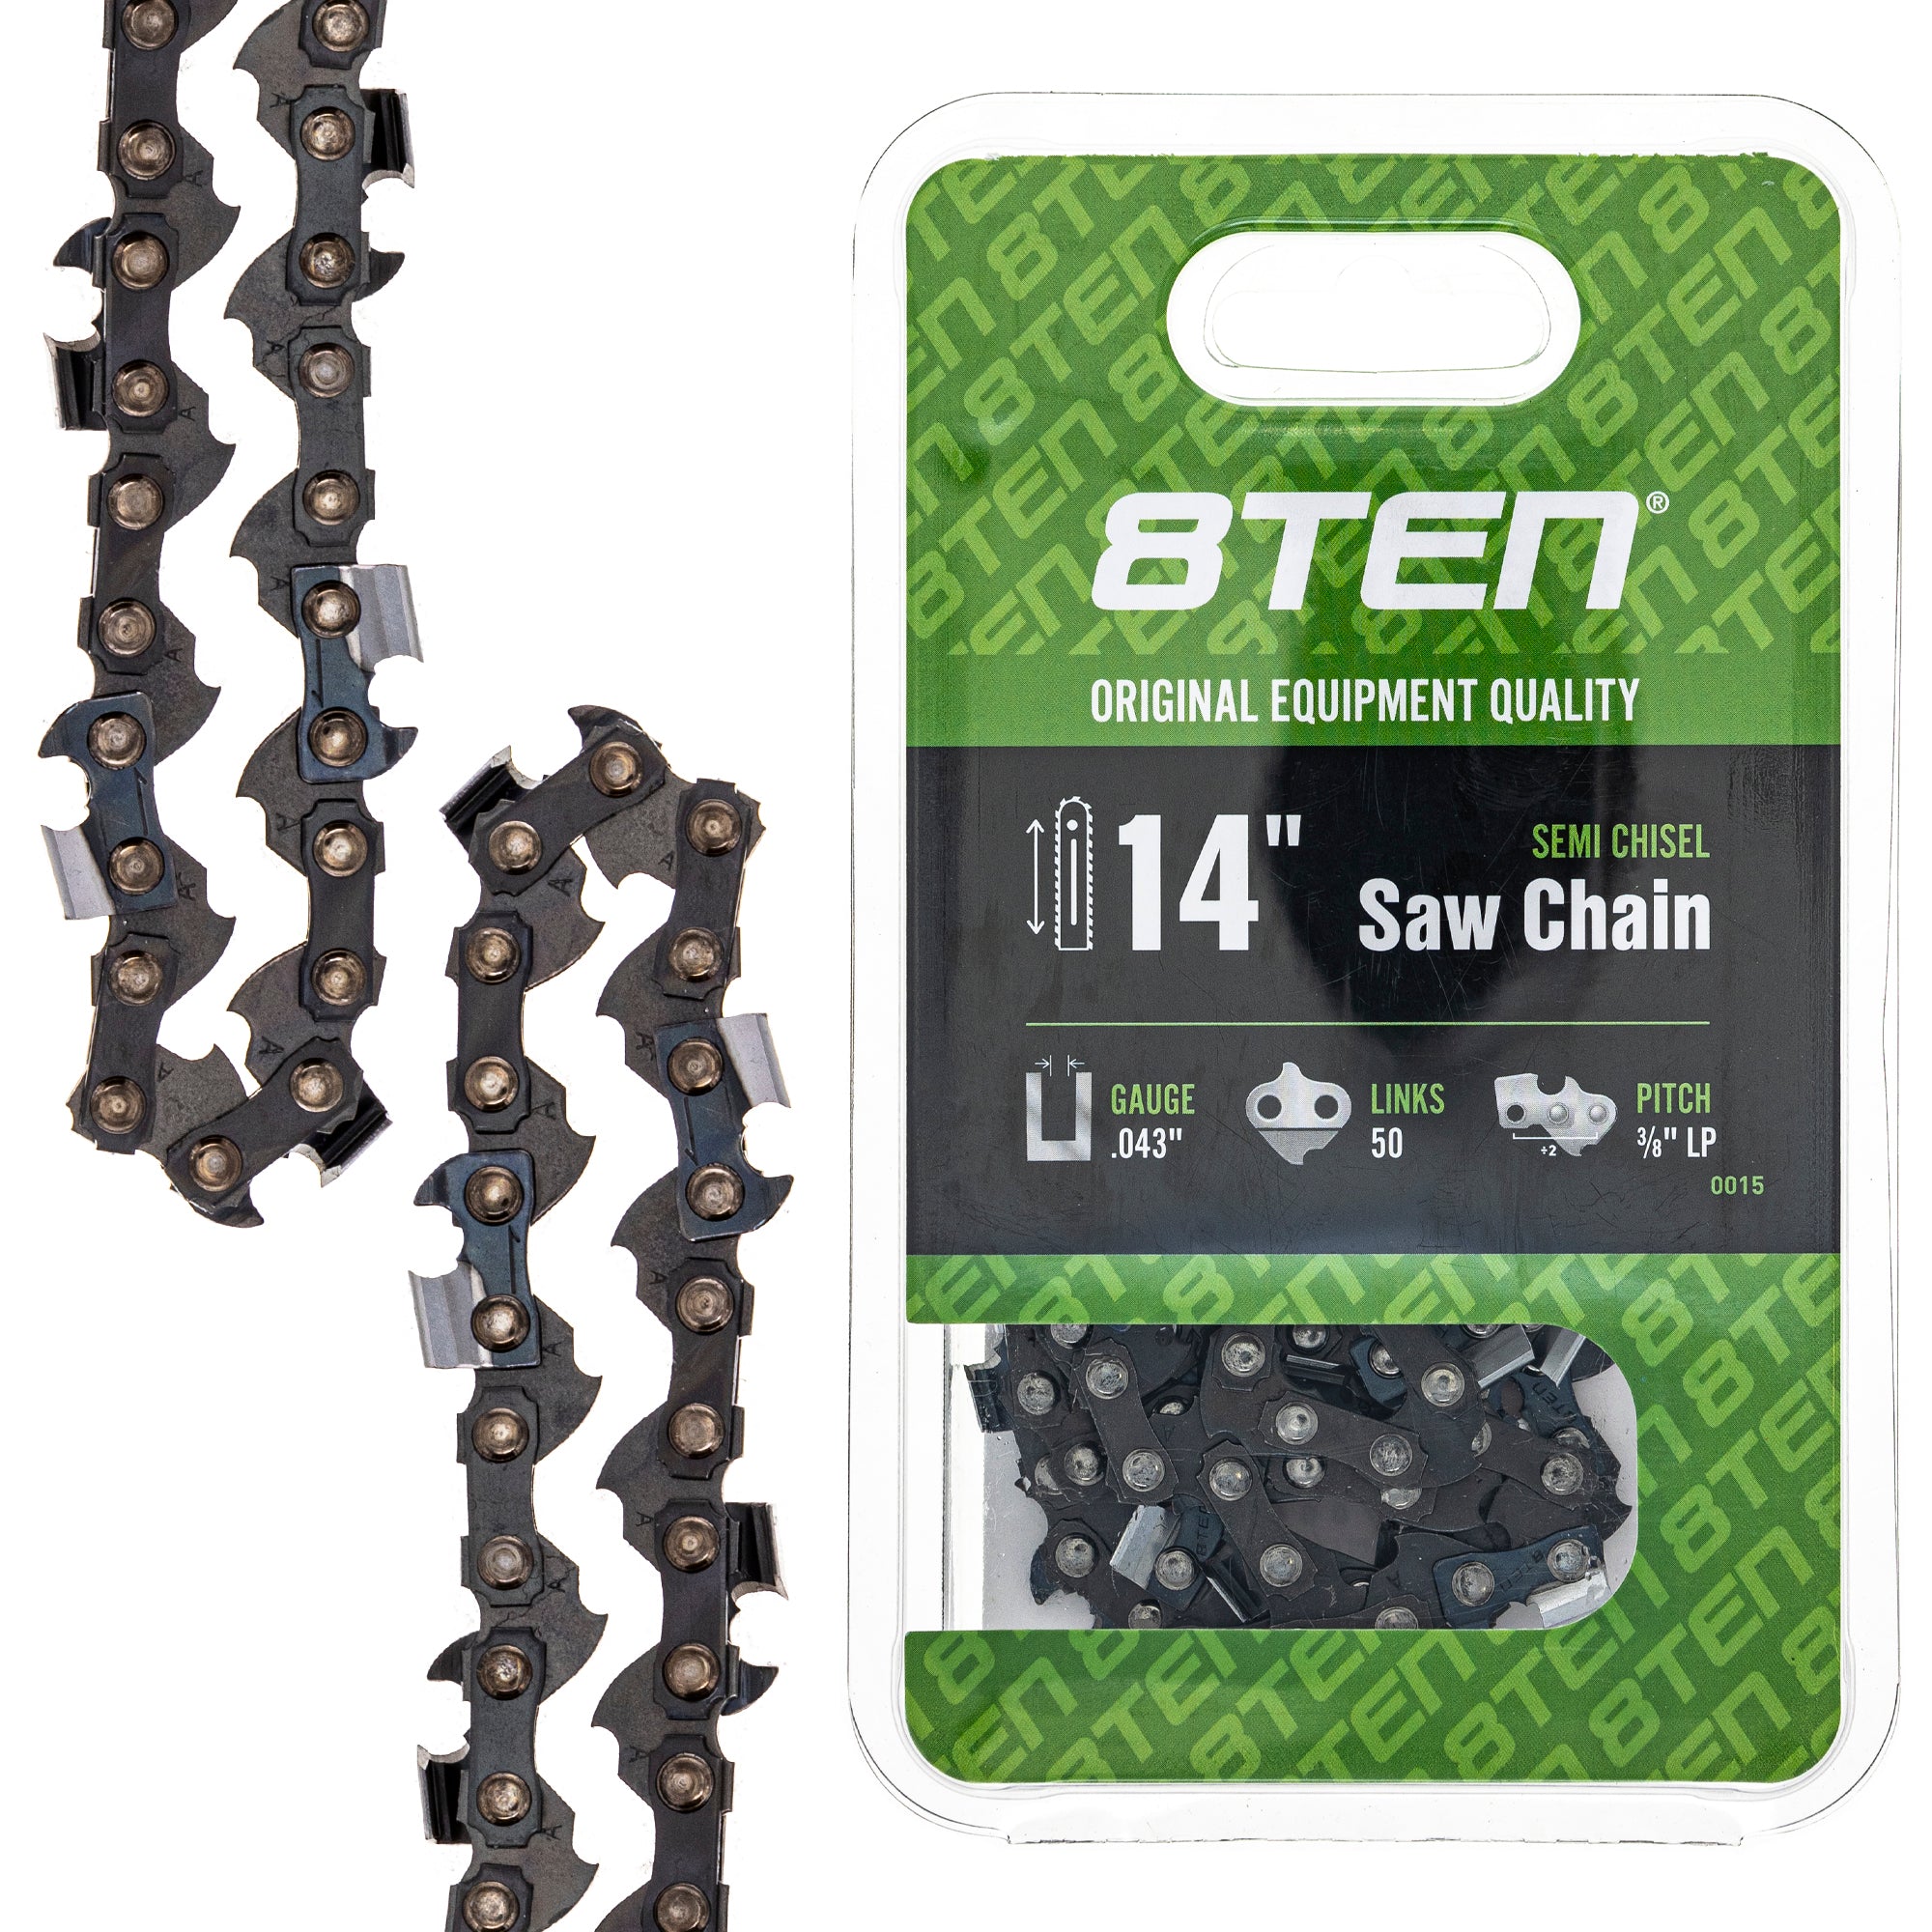 Chainsaw Chain 14 Inch .043 3/8 LP 50DL for zOTHER Stens Oregon Carlton MSE MSA MS HTE 8TEN 810-CCC2237H